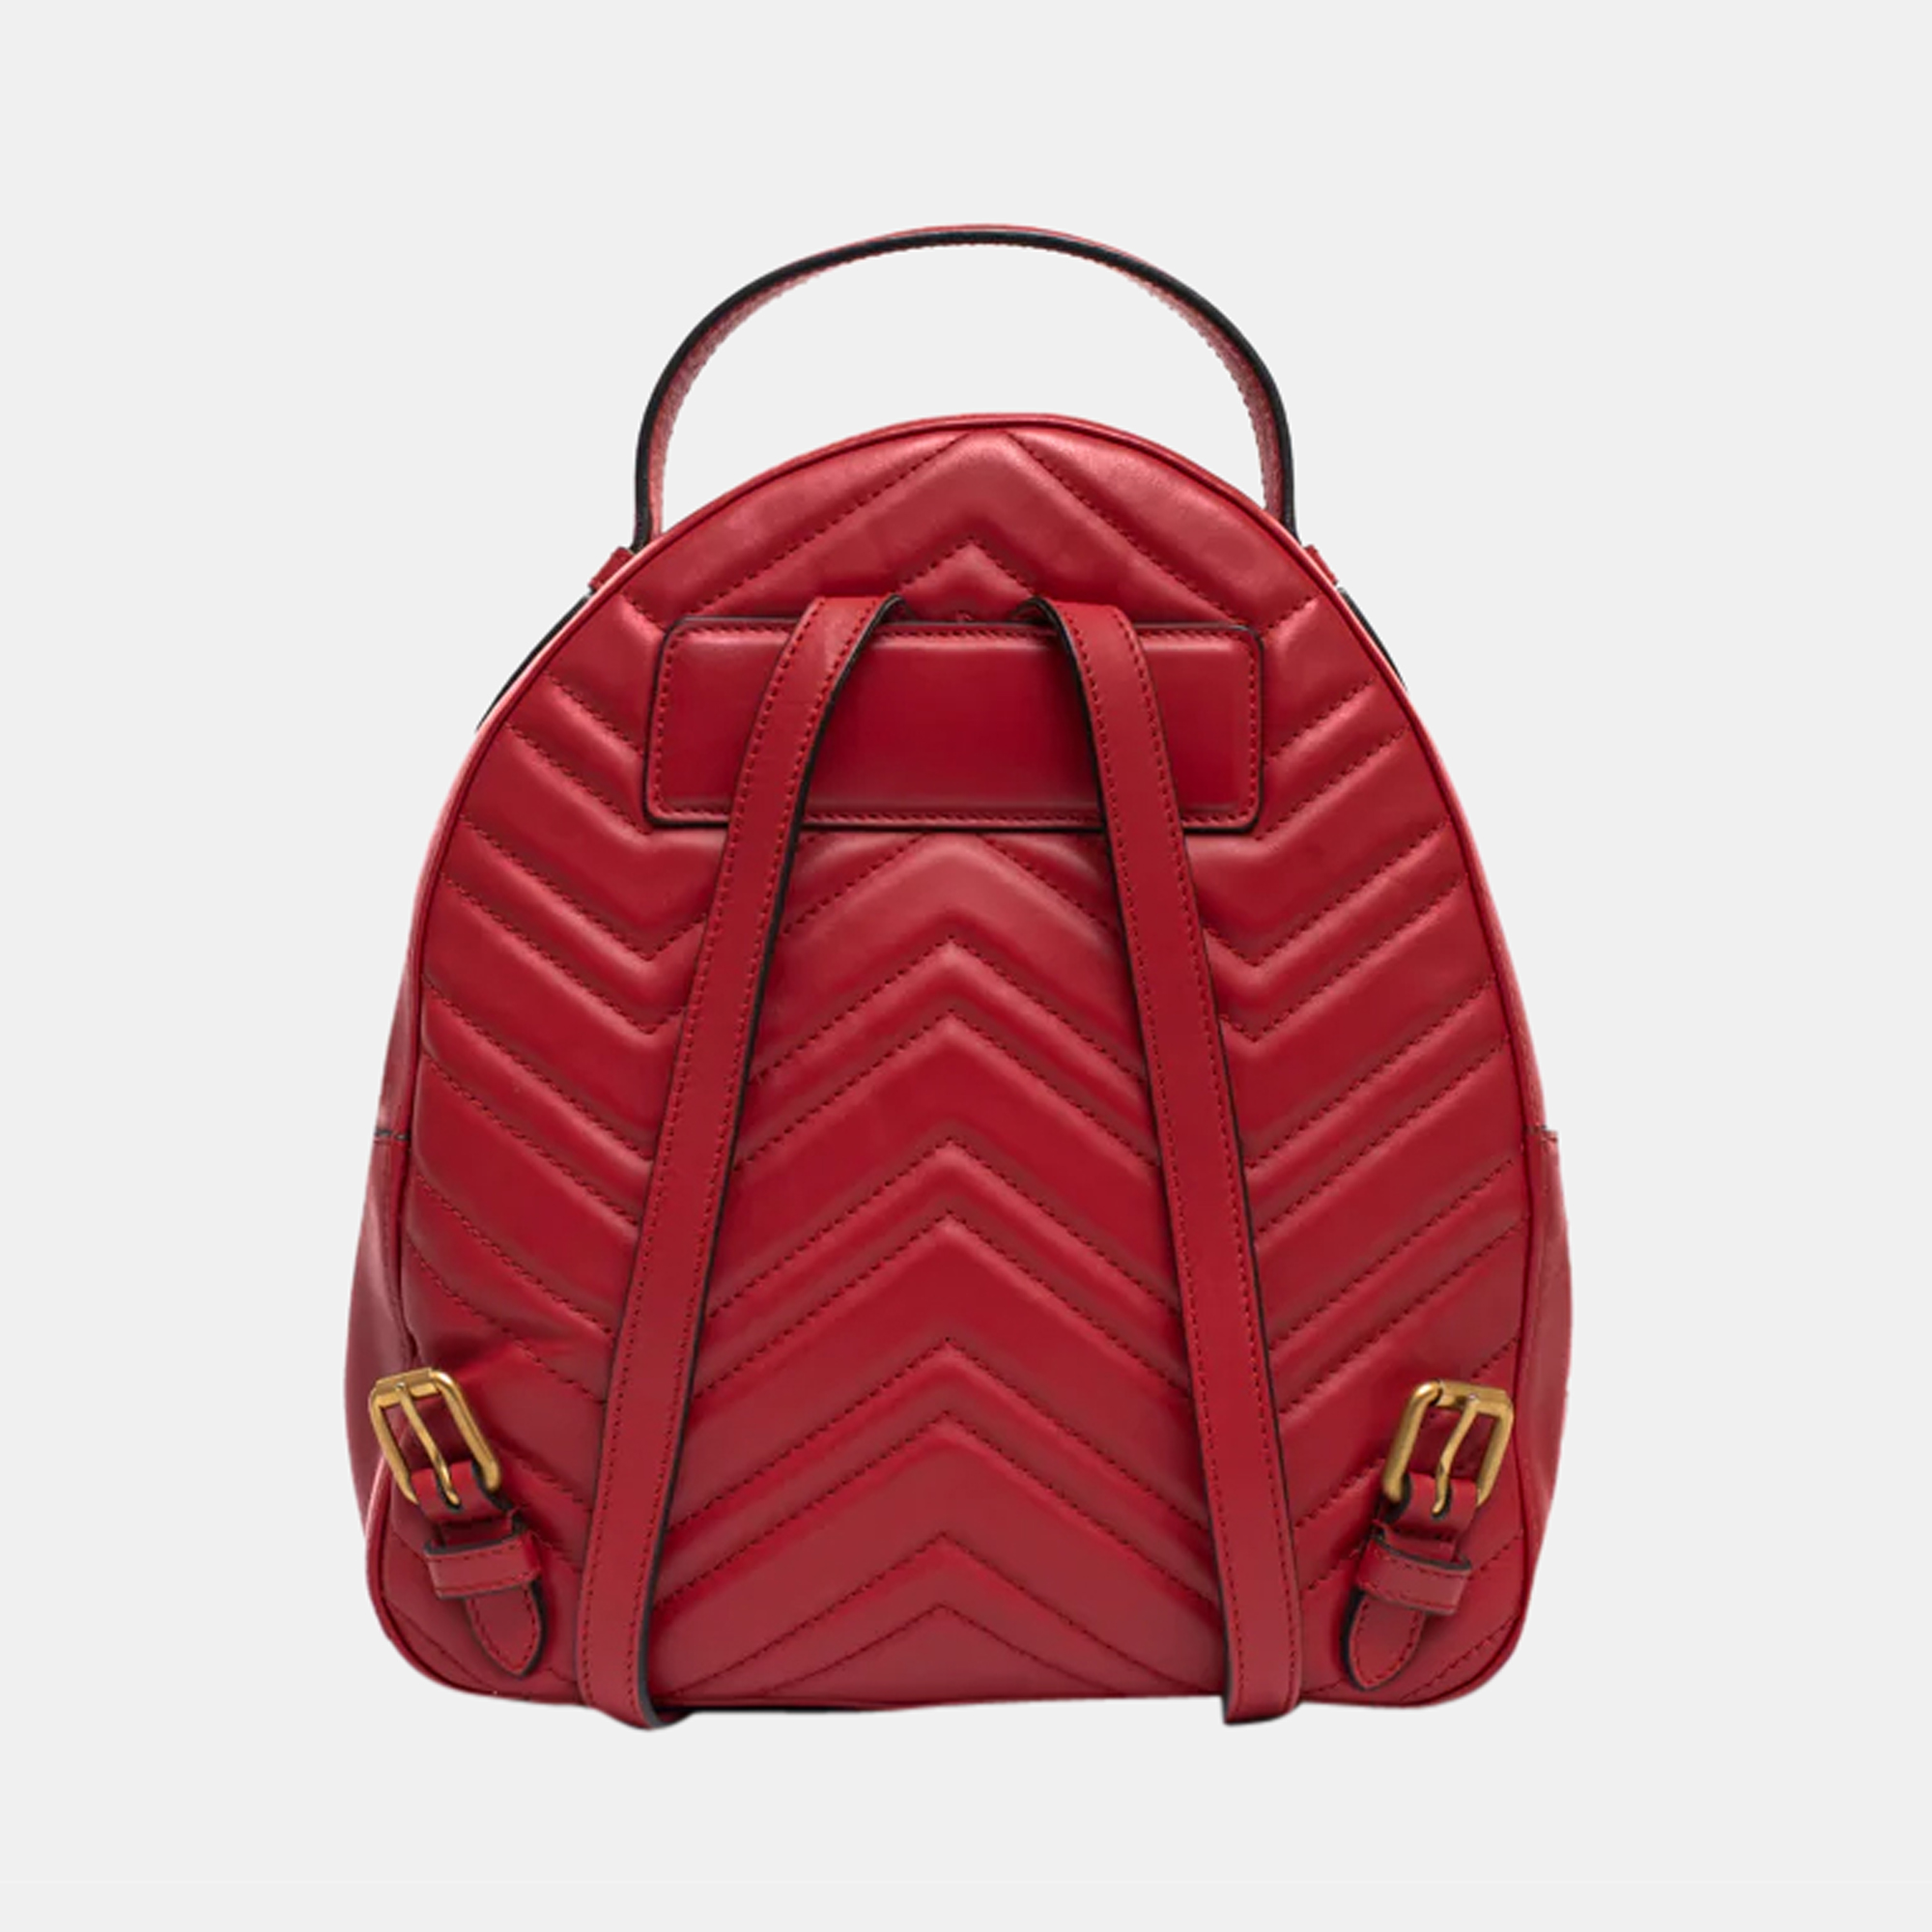 Gucci Red Matelassé Leather GG Marmont Backpack